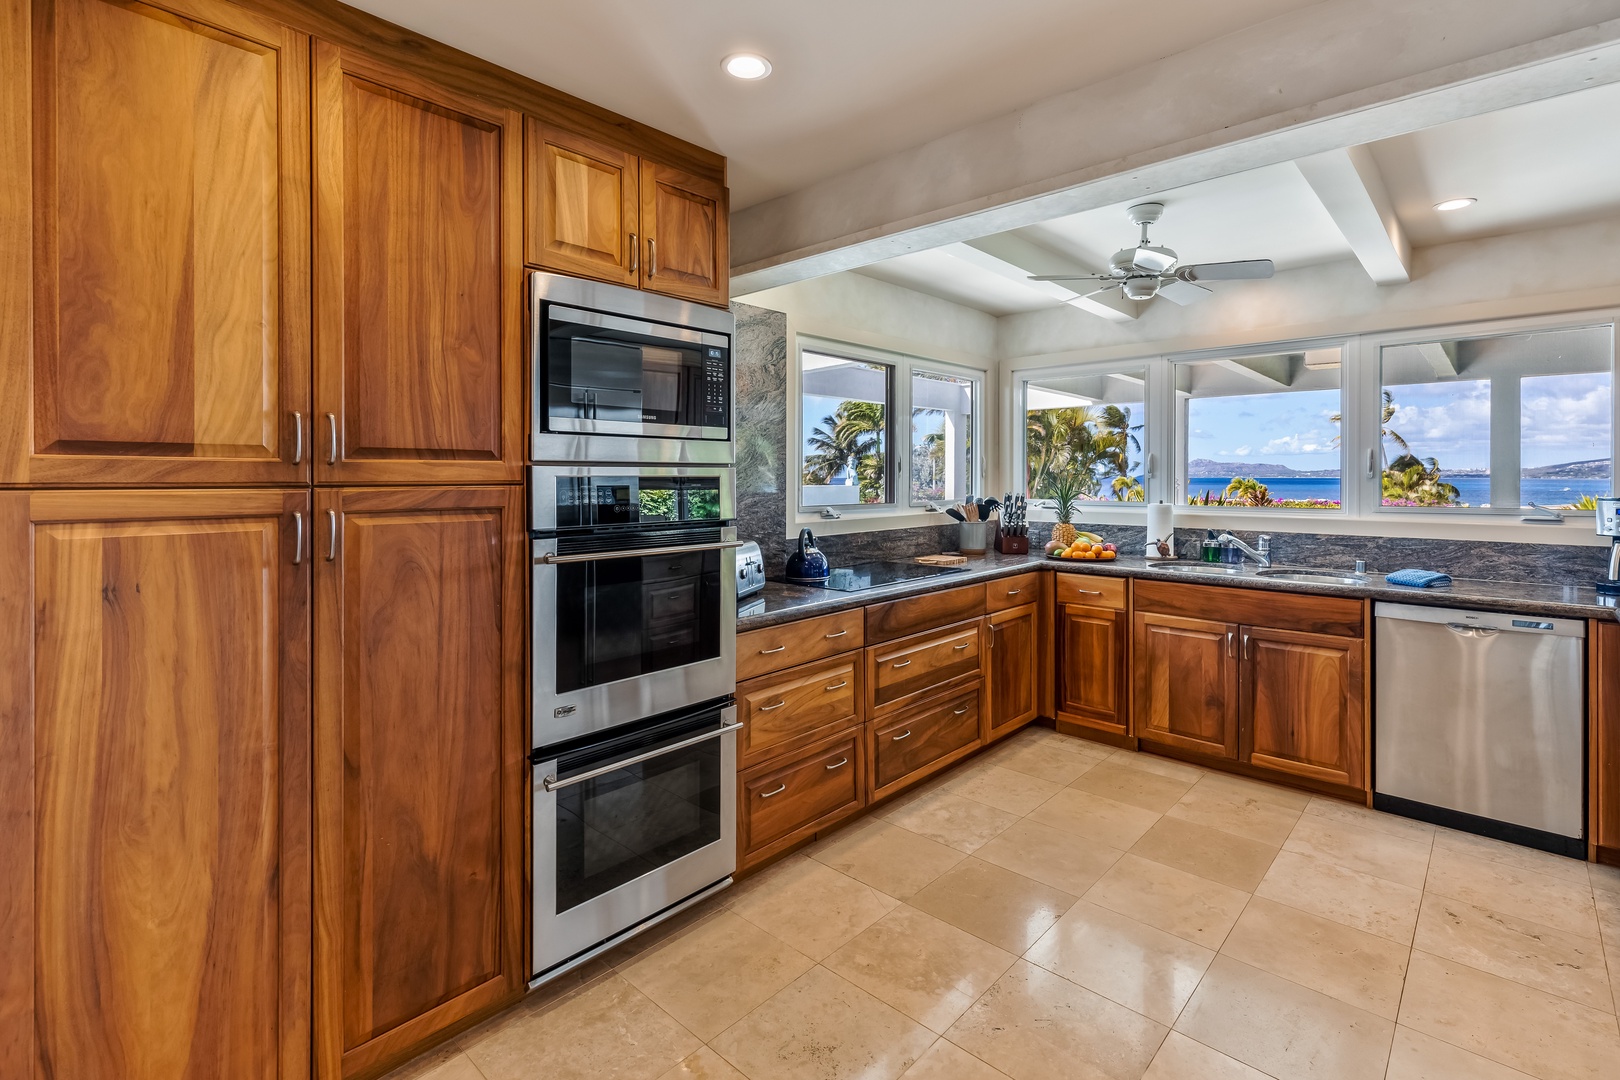 Honolulu Vacation Rentals, Hale Ola - Ocean Views from the kitchen